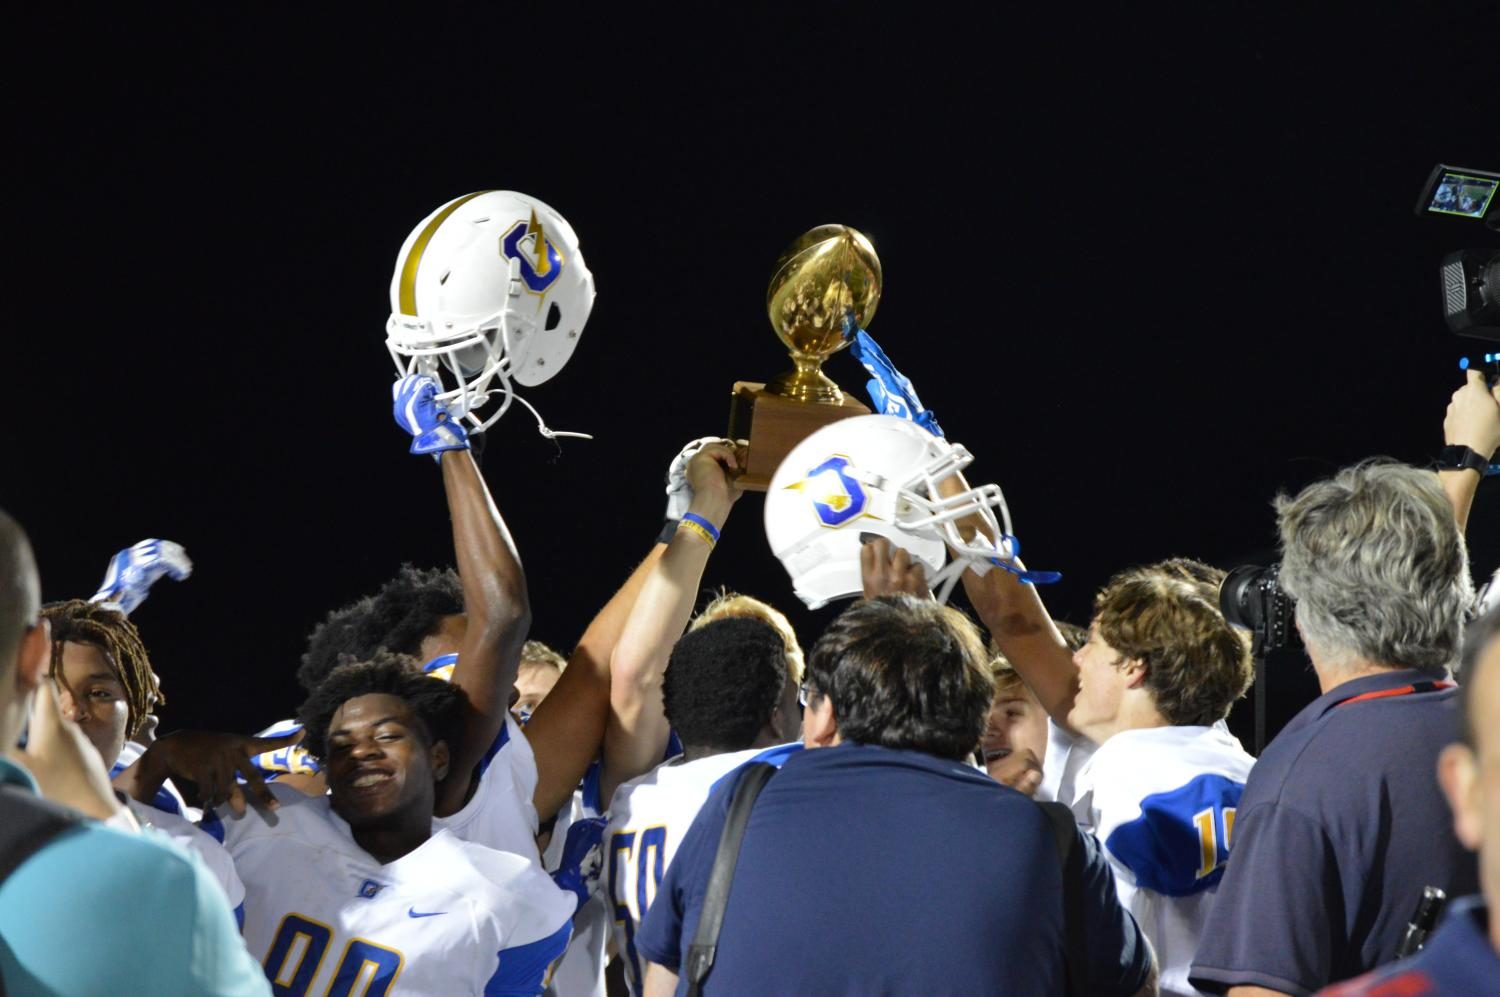 The Chargers hoist the Crosstown Classic Trophy following the Oxfords 41-17 win over Lafayette.